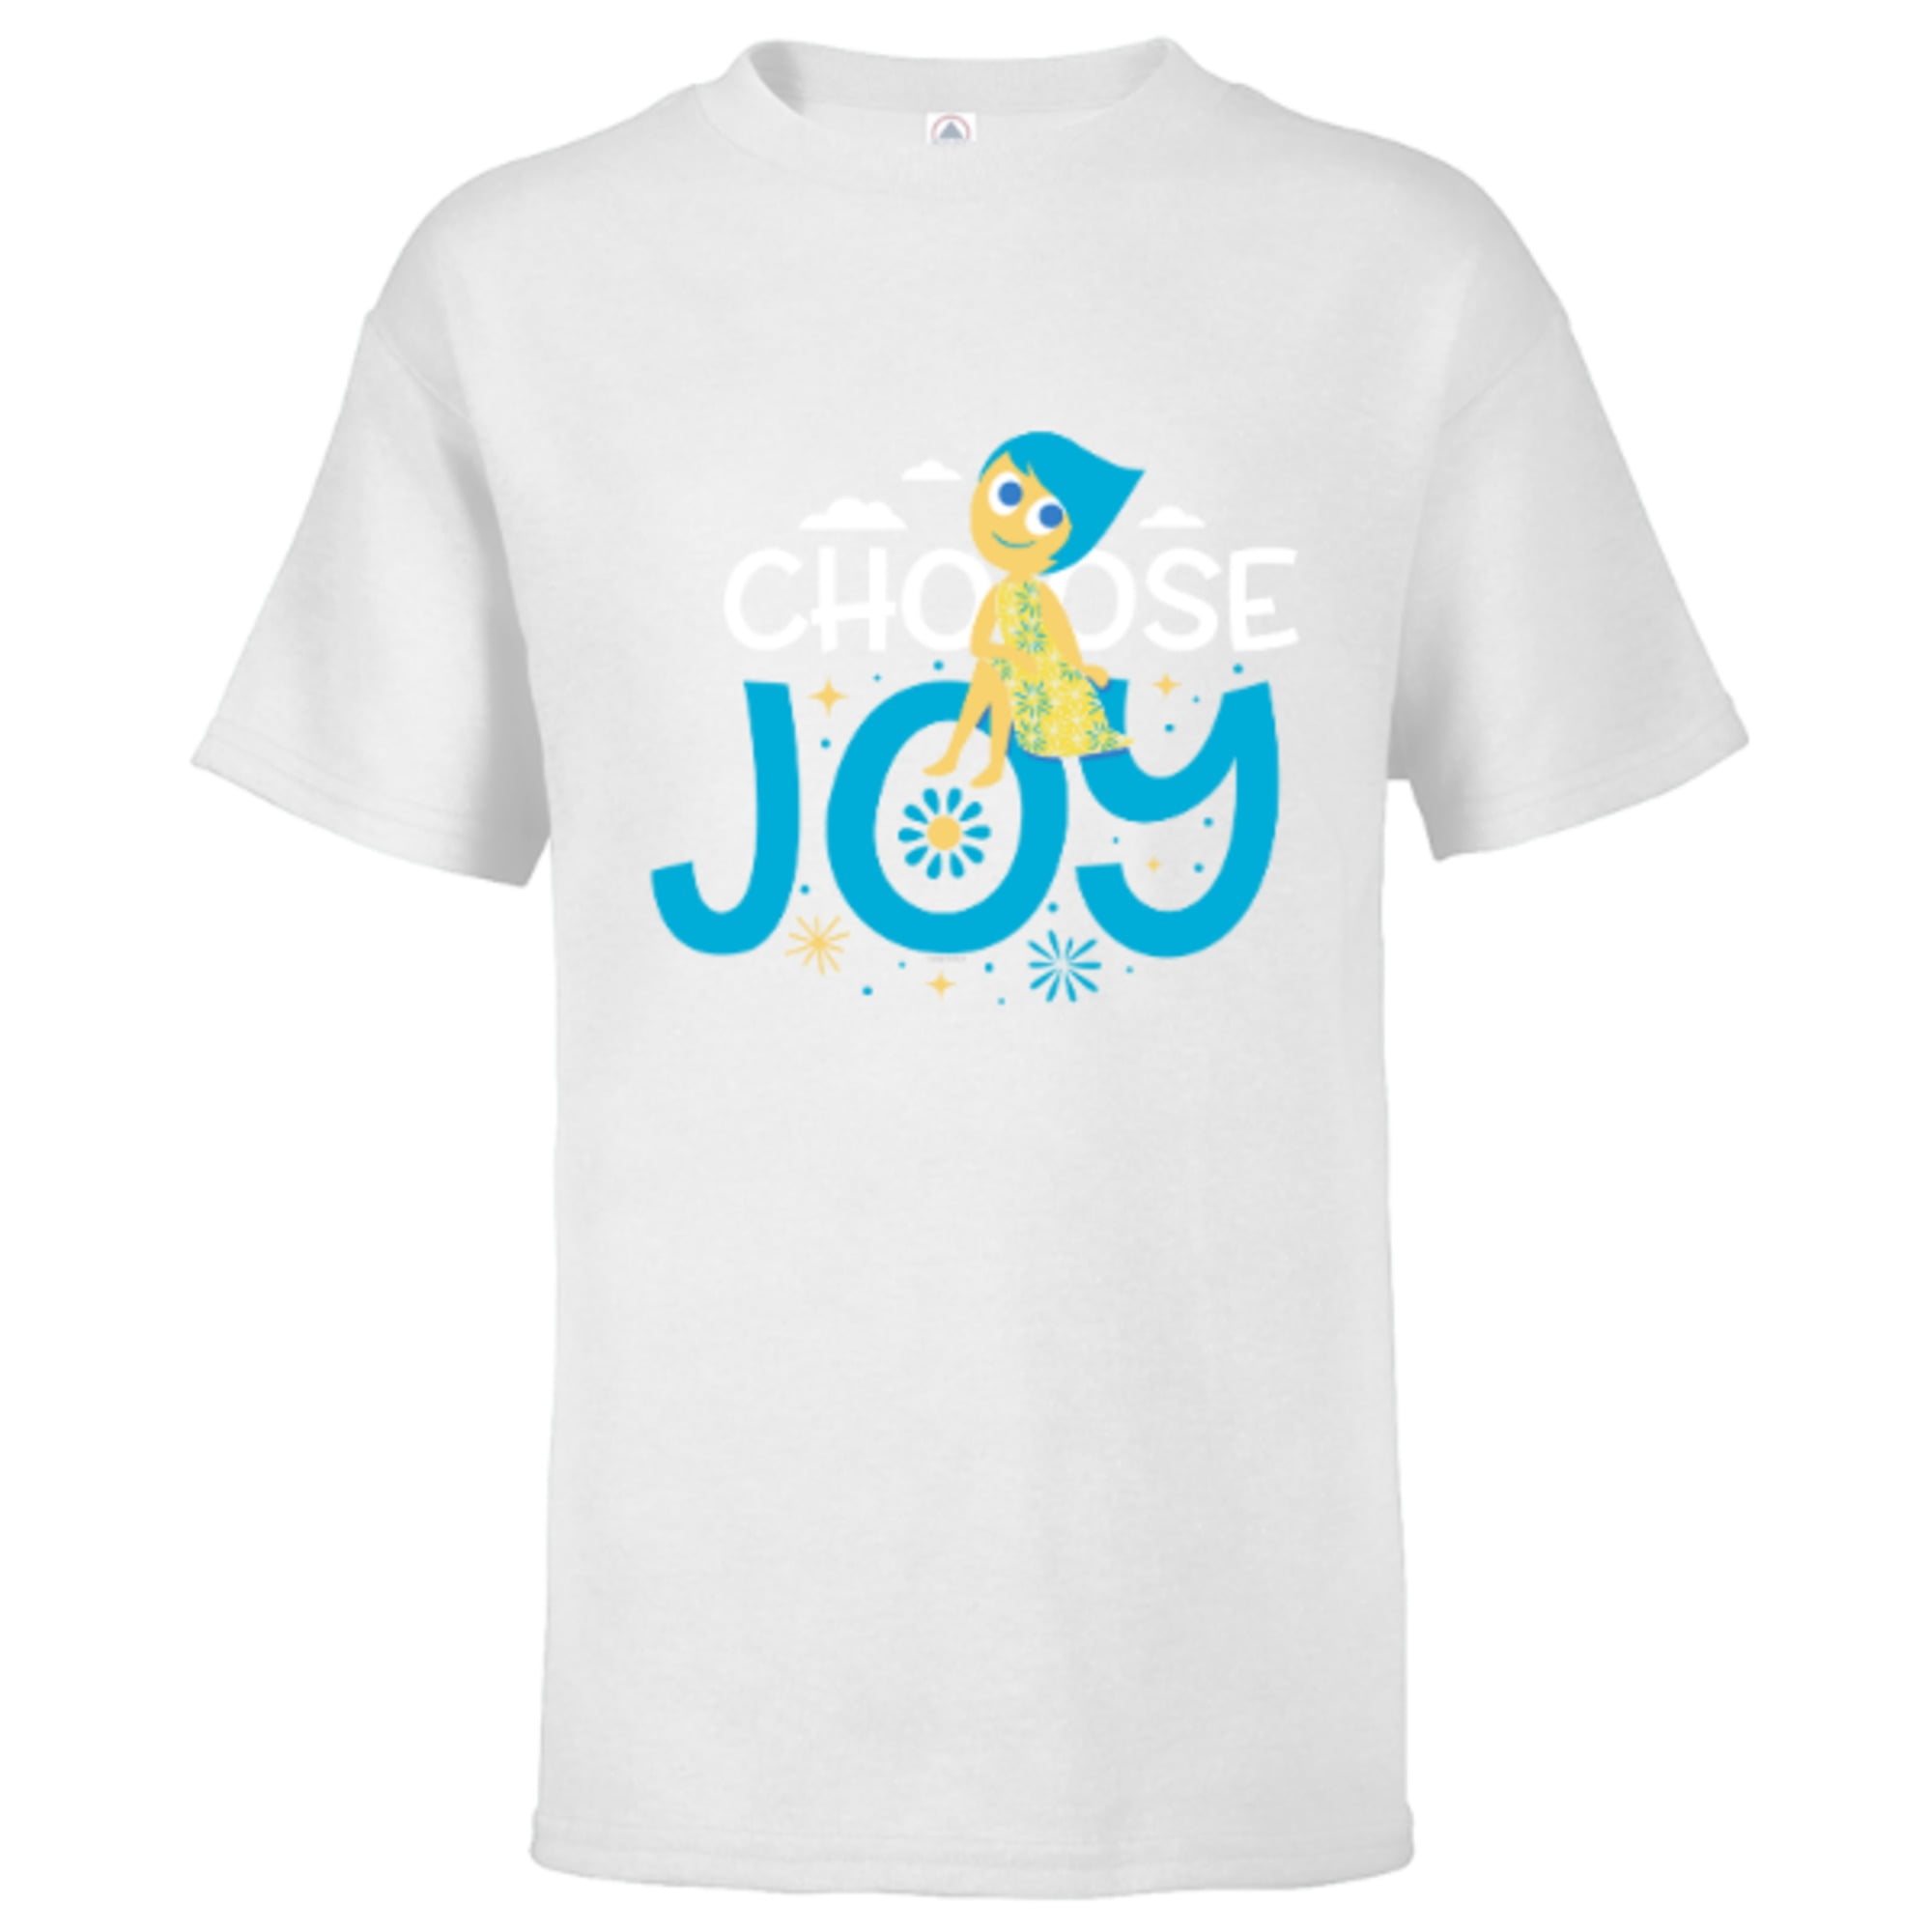 Disney Pixar Inside Out Joy Blue And White Striped Graphic T Shirt